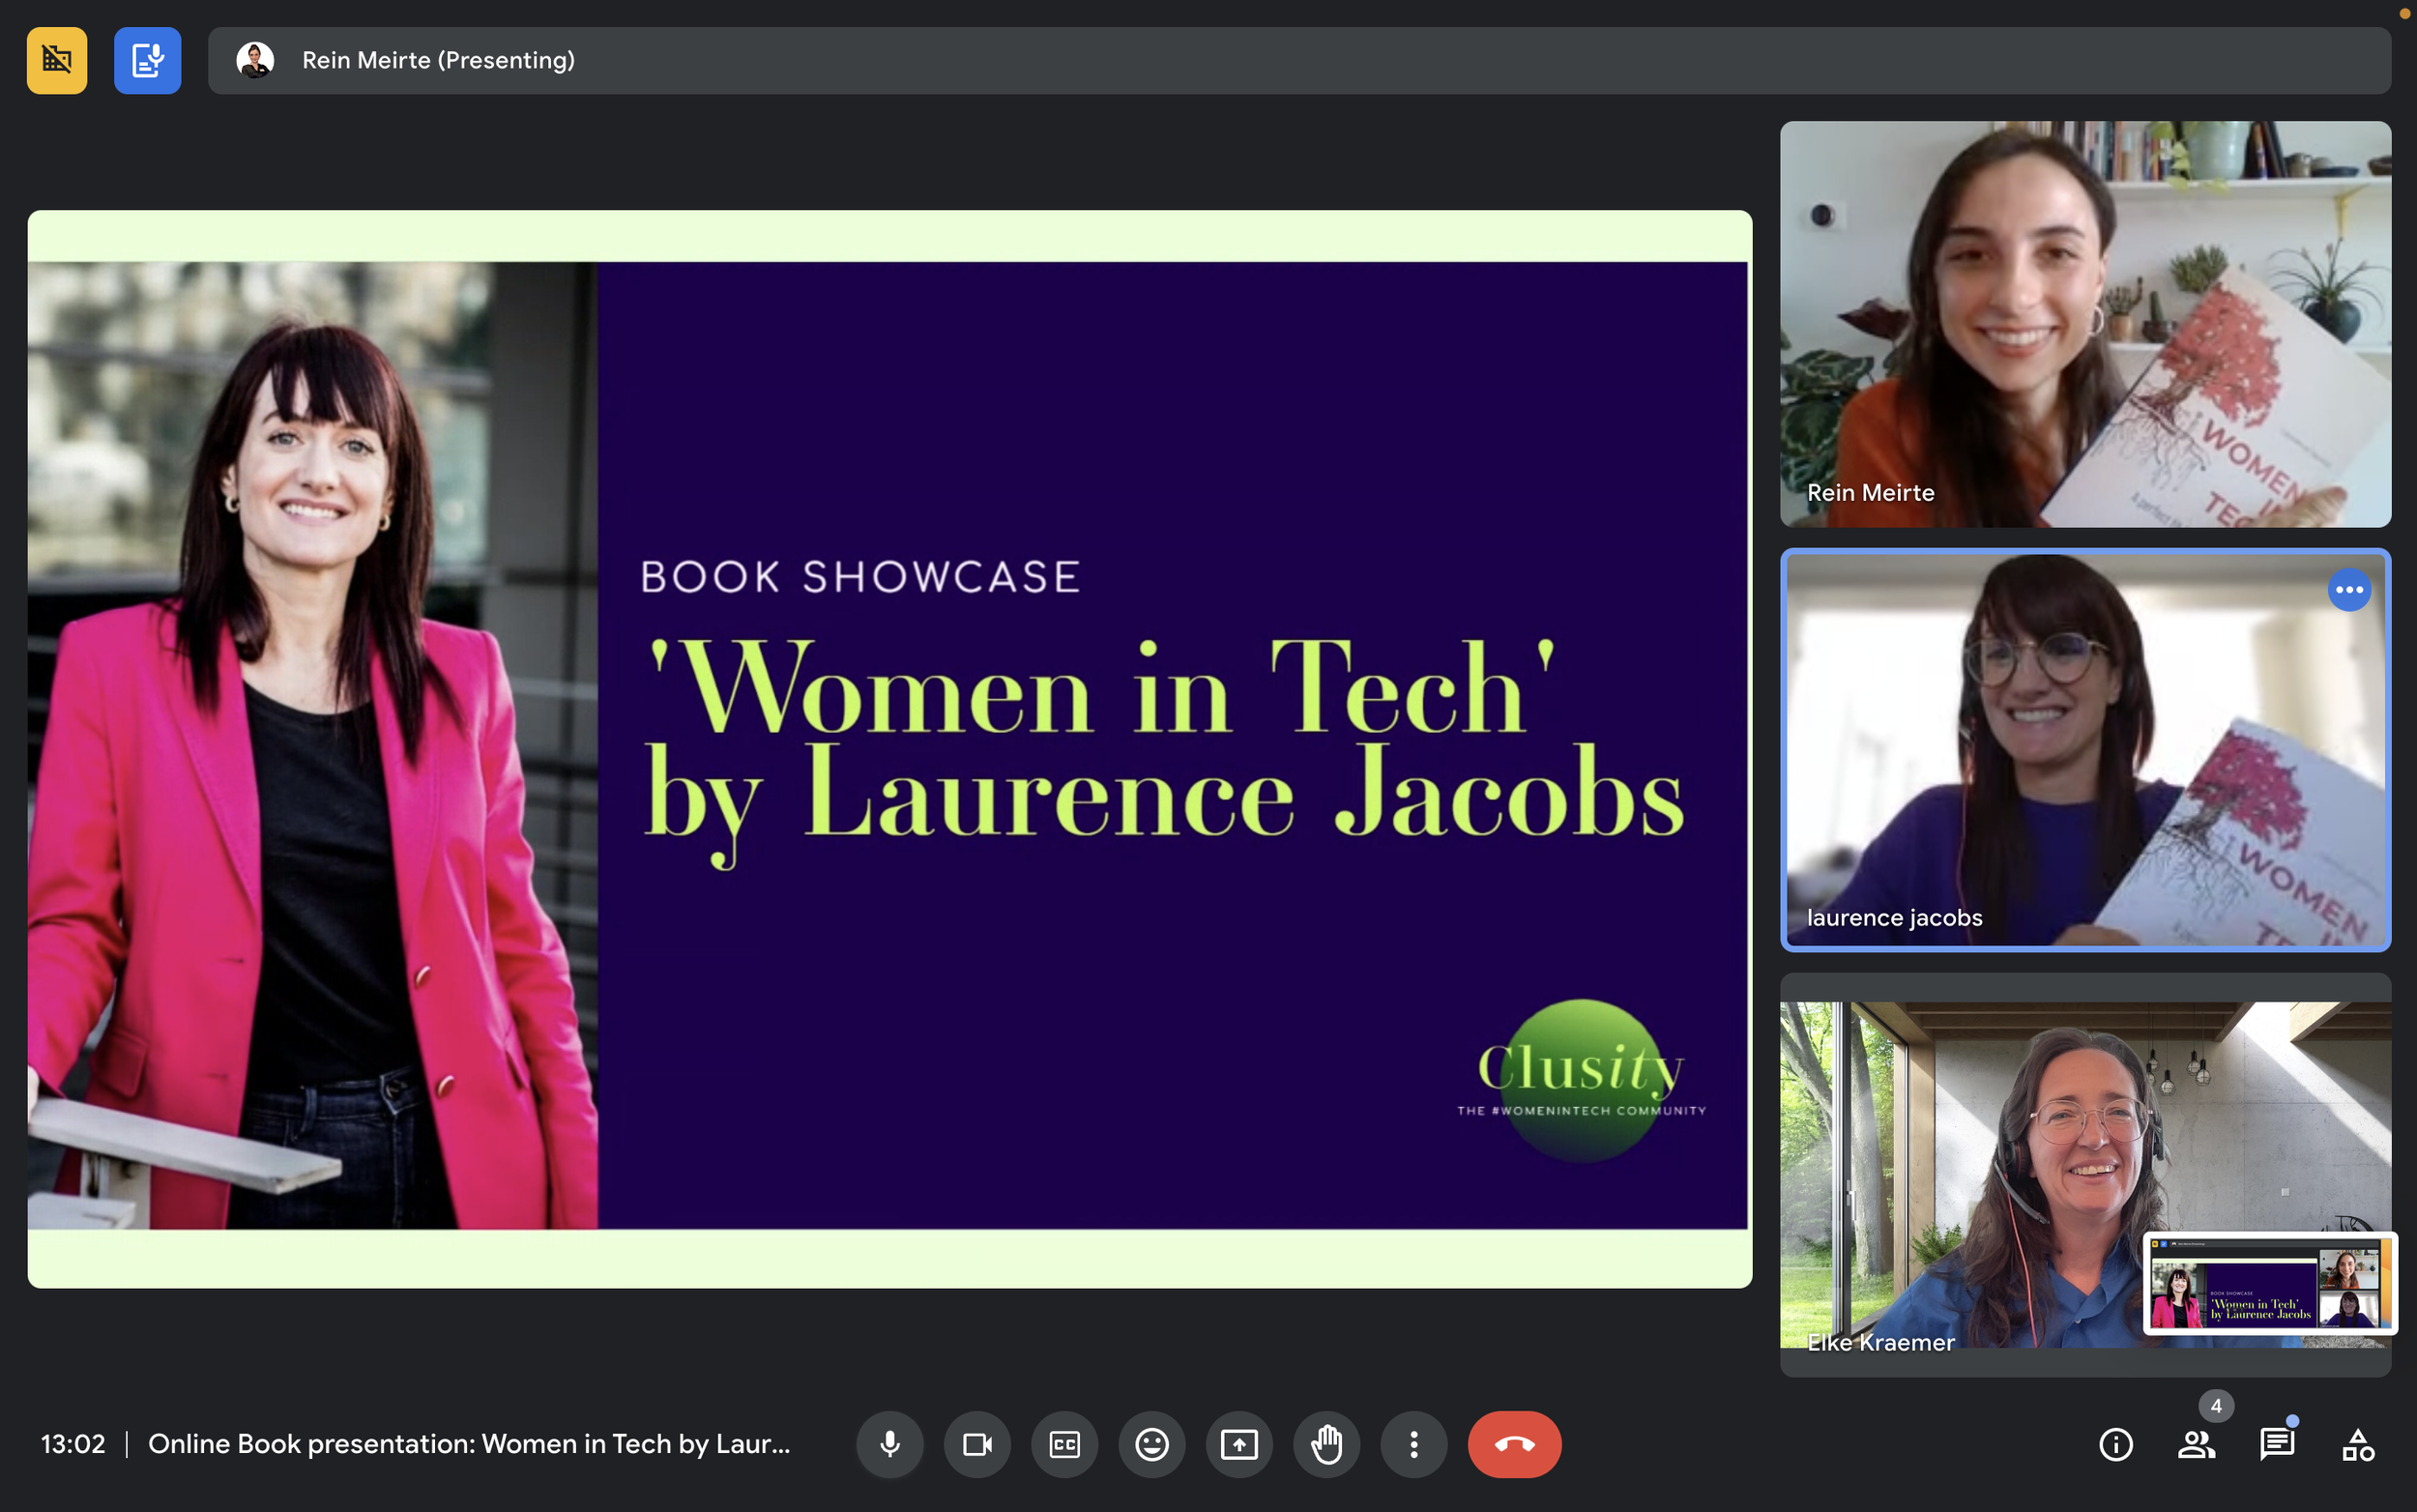 Book Showcase: 'Women in Tech' by Laurence Jacobs